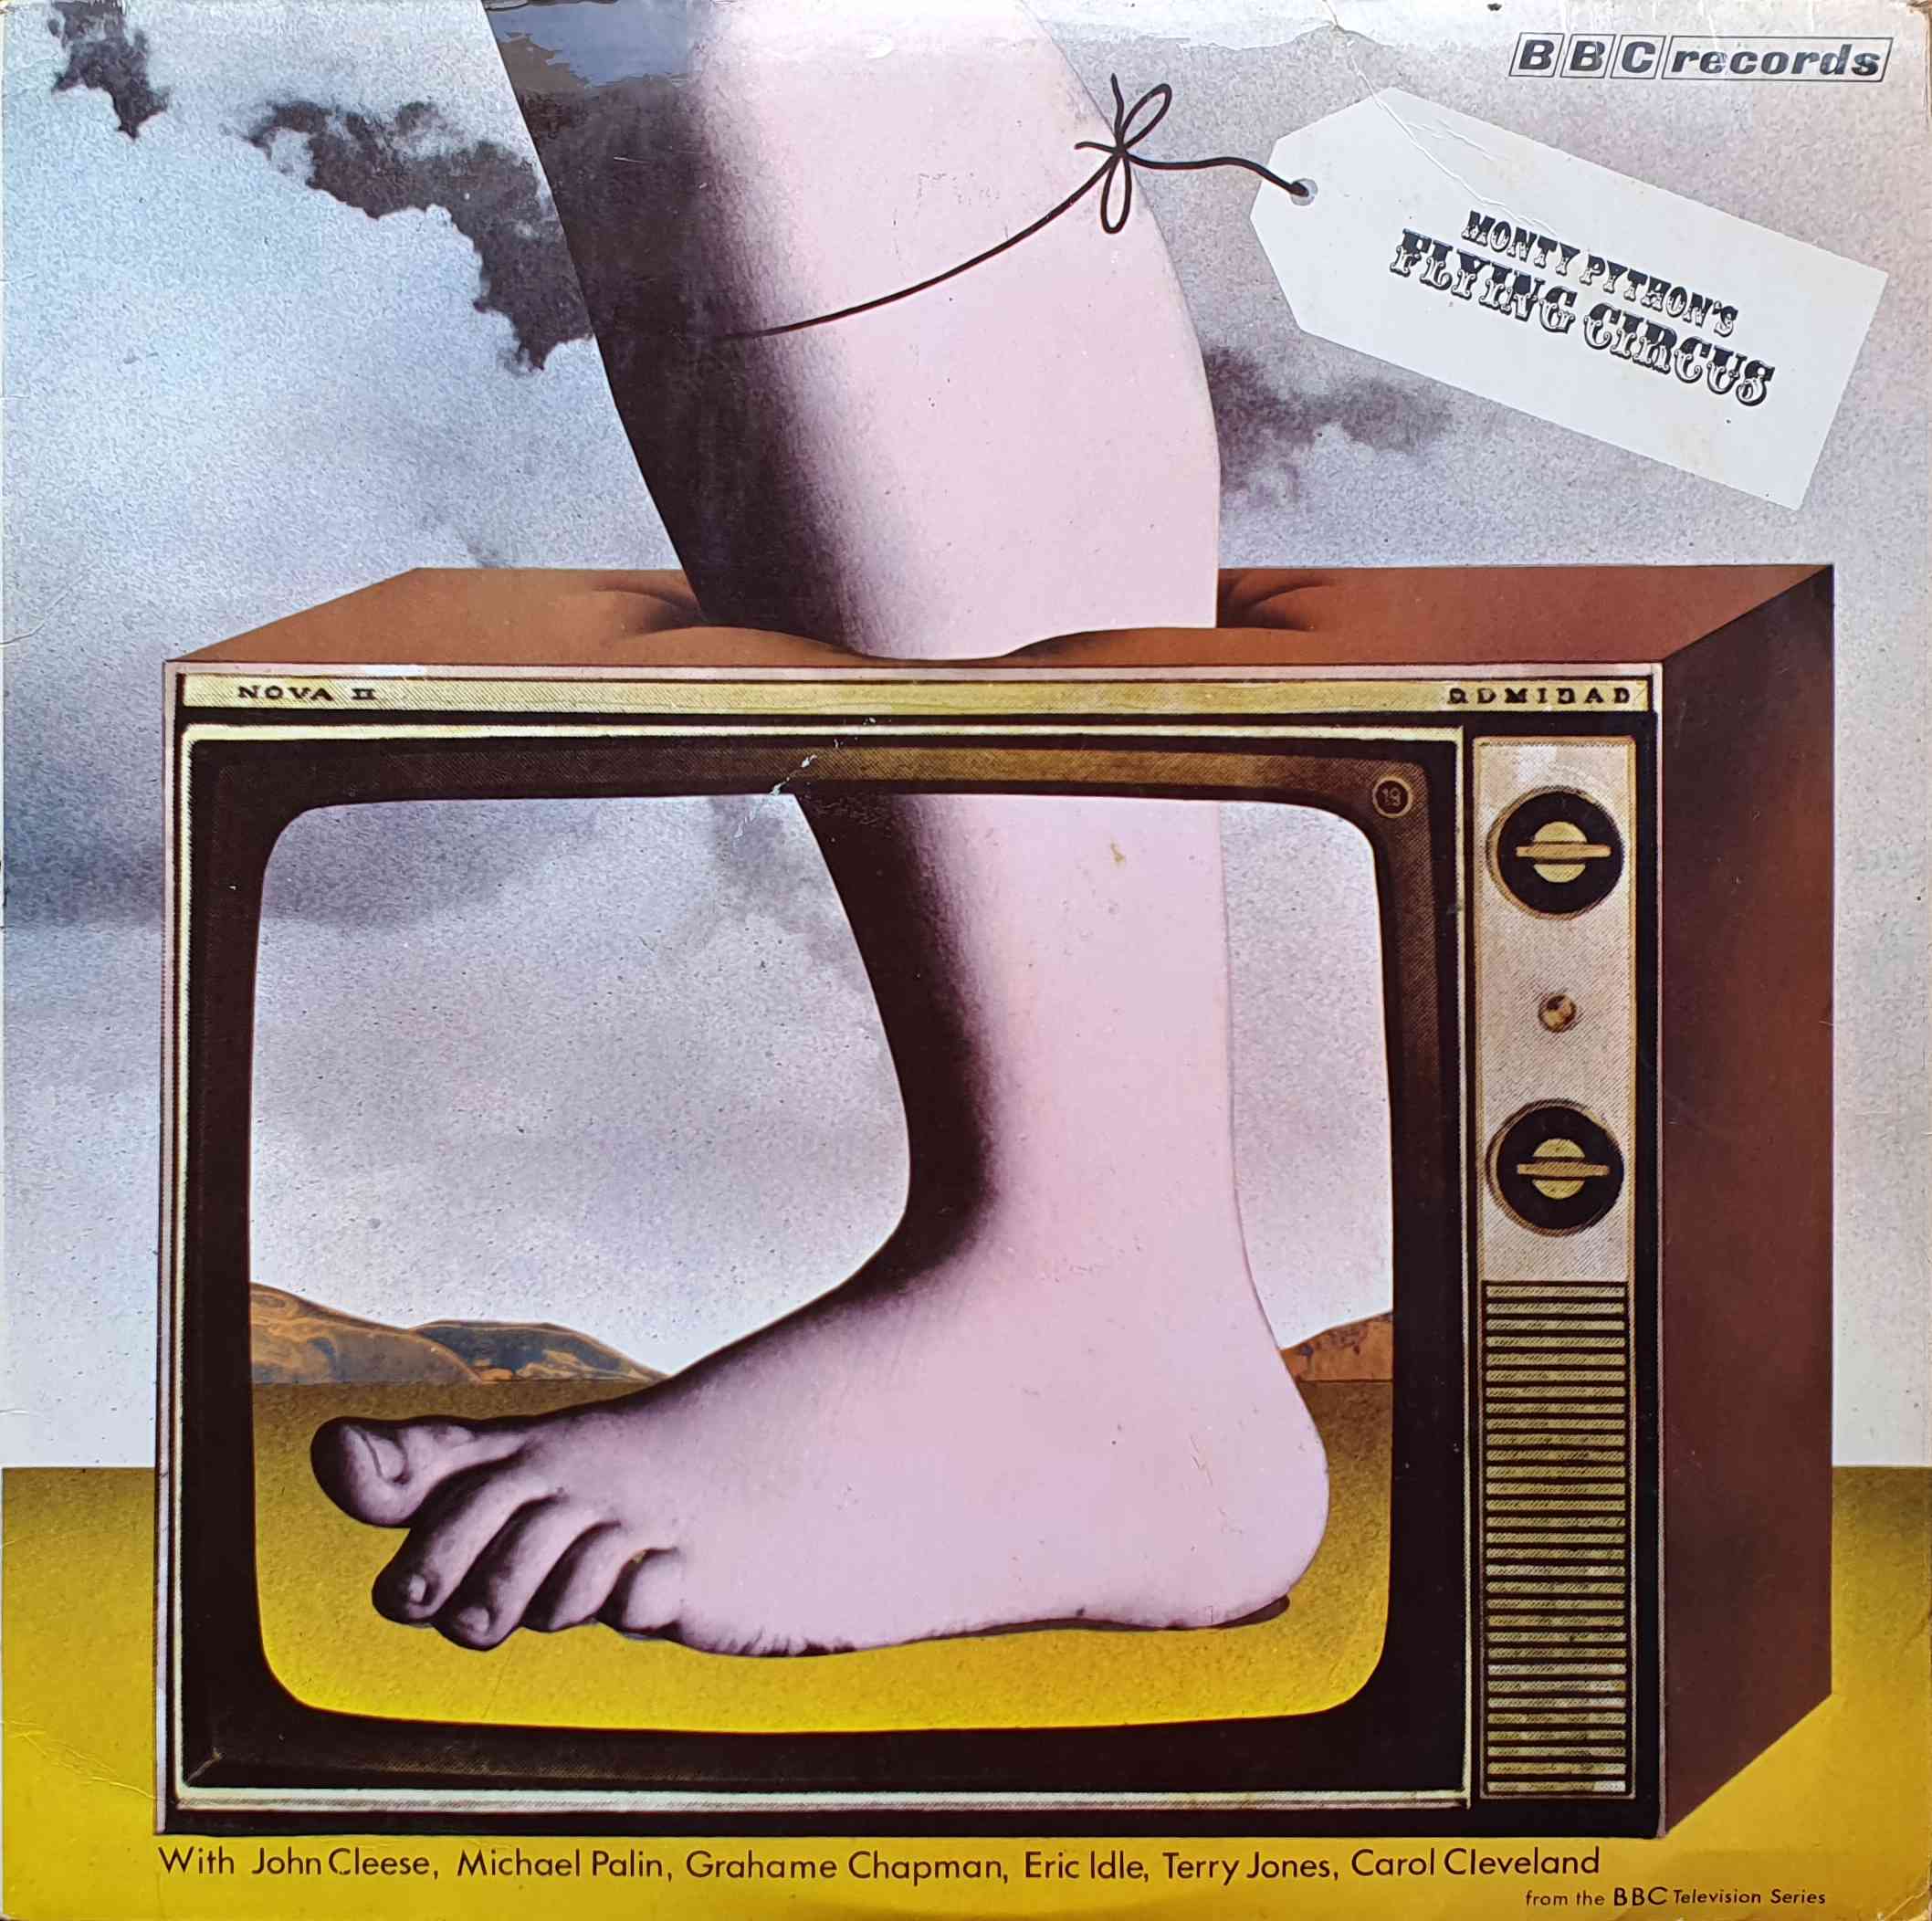 Picture of REB 73 Monty Python's flying circus by artist Monty Python from the BBC albums - Records and Tapes library